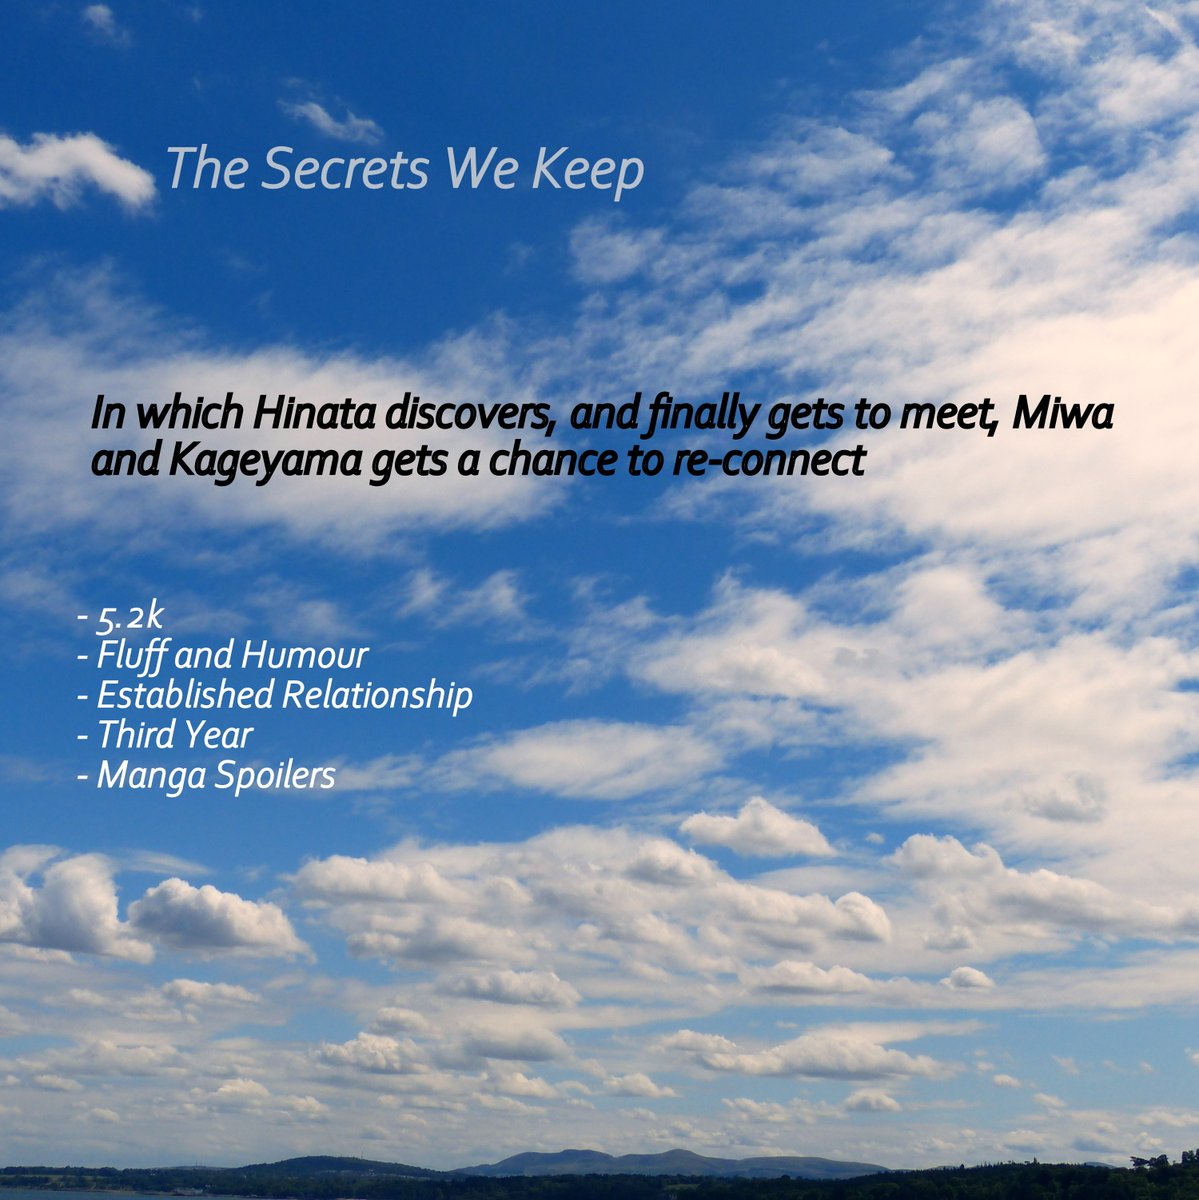  The Secrets We Keep In which Hinata discovers, and finally gets to meet, Miwa, and Kageyama gets a chance to re-connect 5.2k Fluff and Humour, Established Relationship Third Year https://archiveofourown.org/works/23322715 